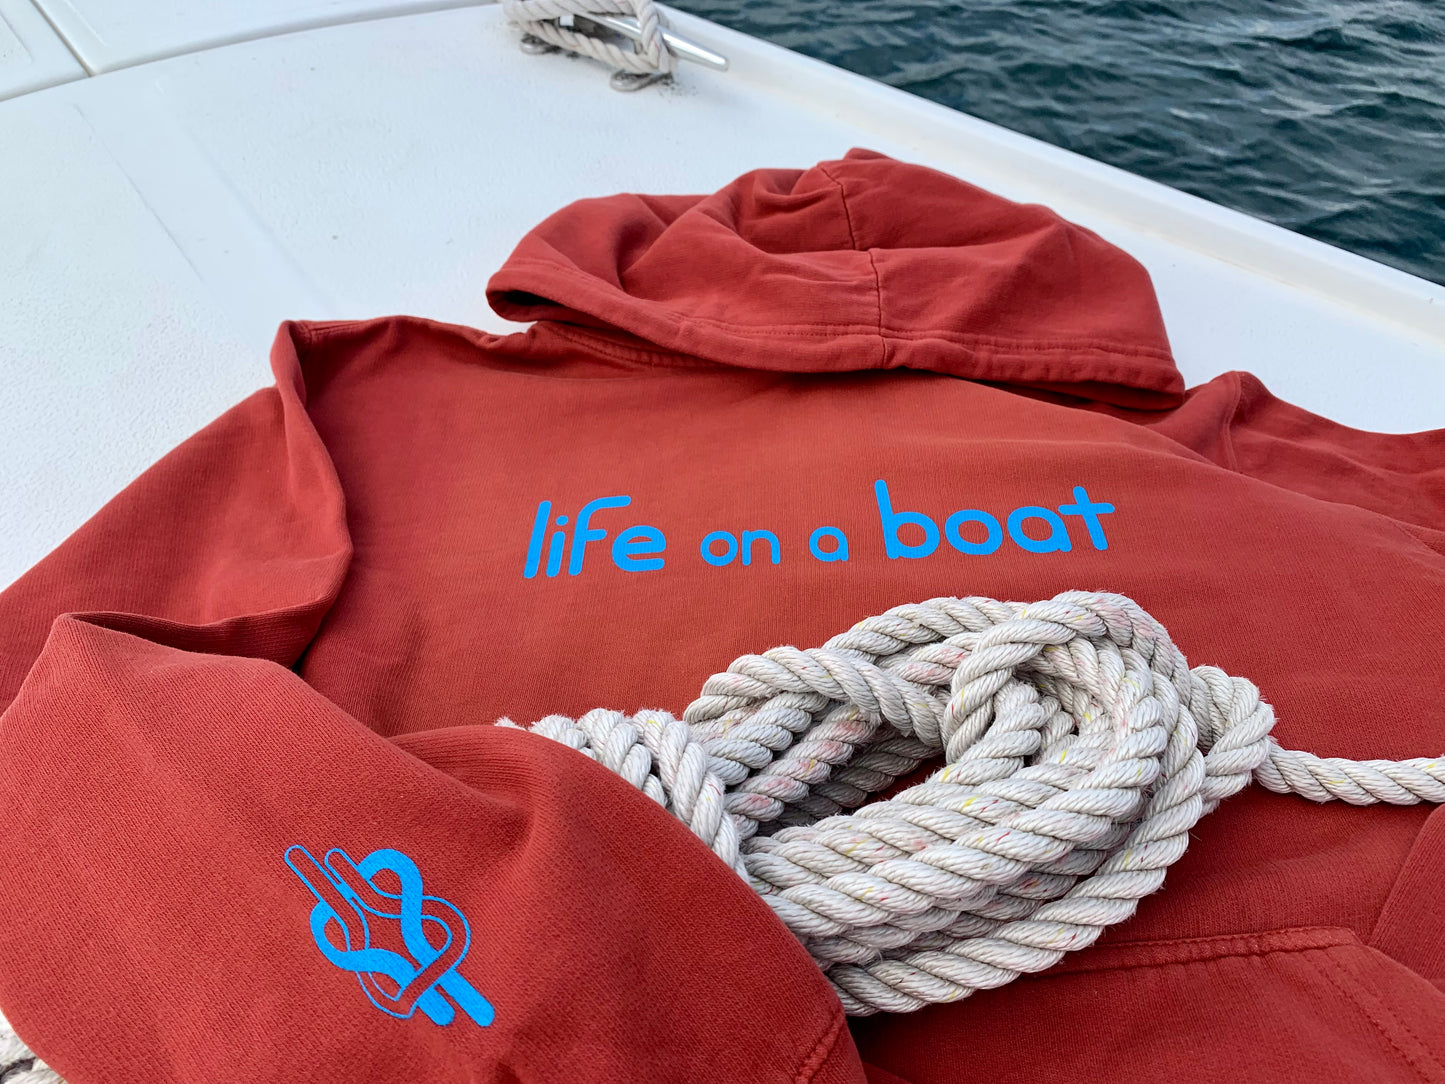 Life on a Boat Hoodie